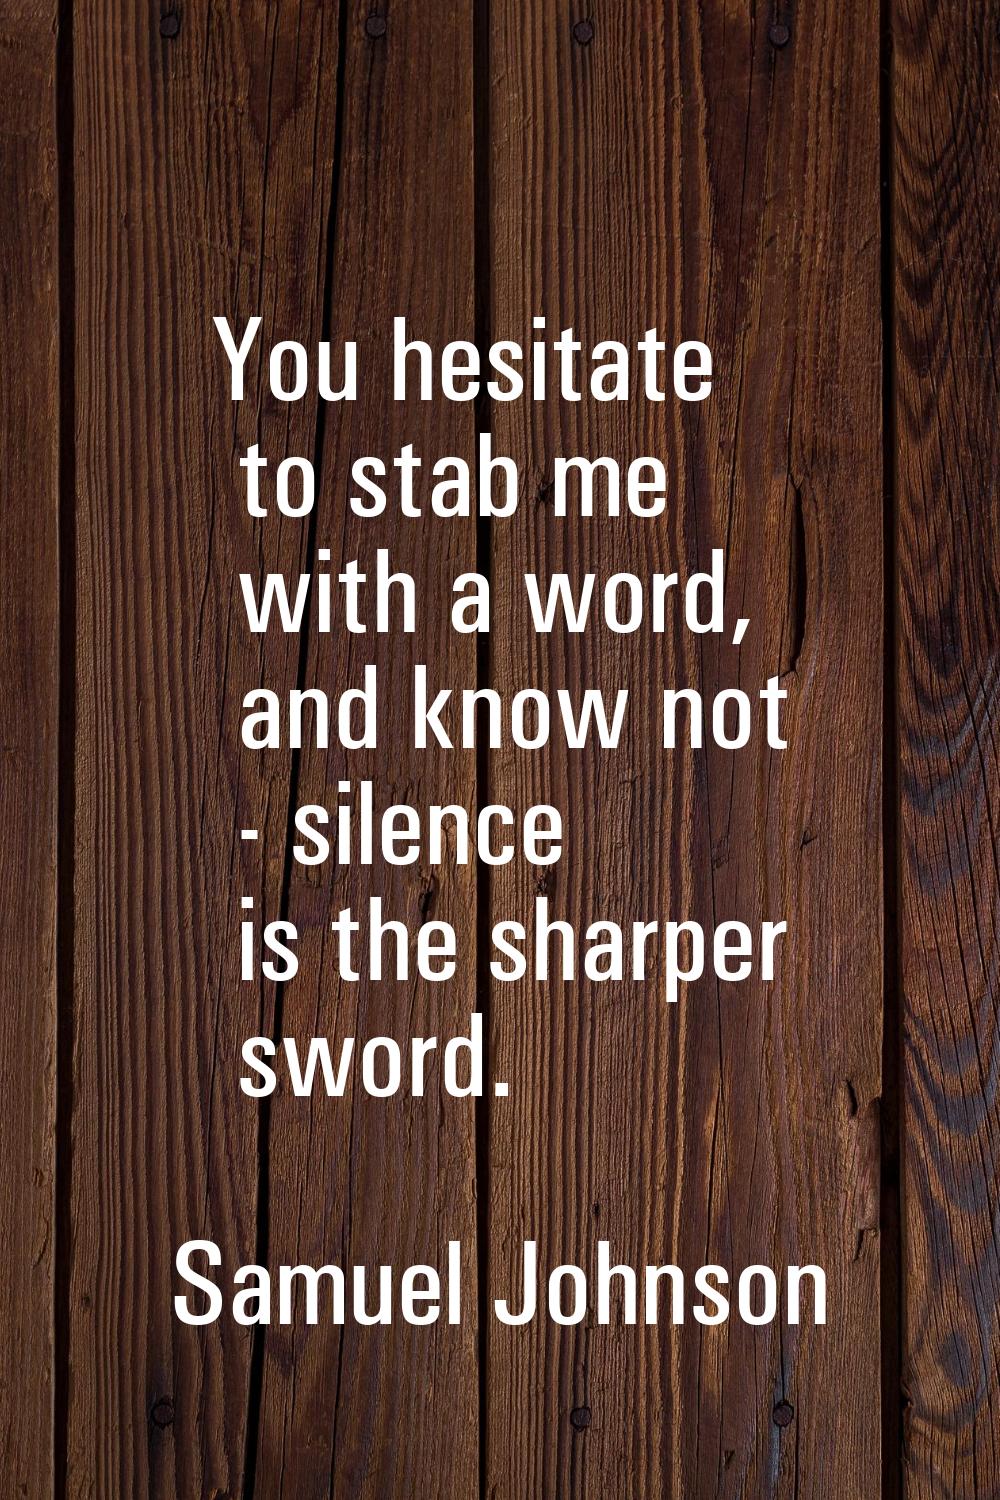 You hesitate to stab me with a word, and know not - silence is the sharper sword.